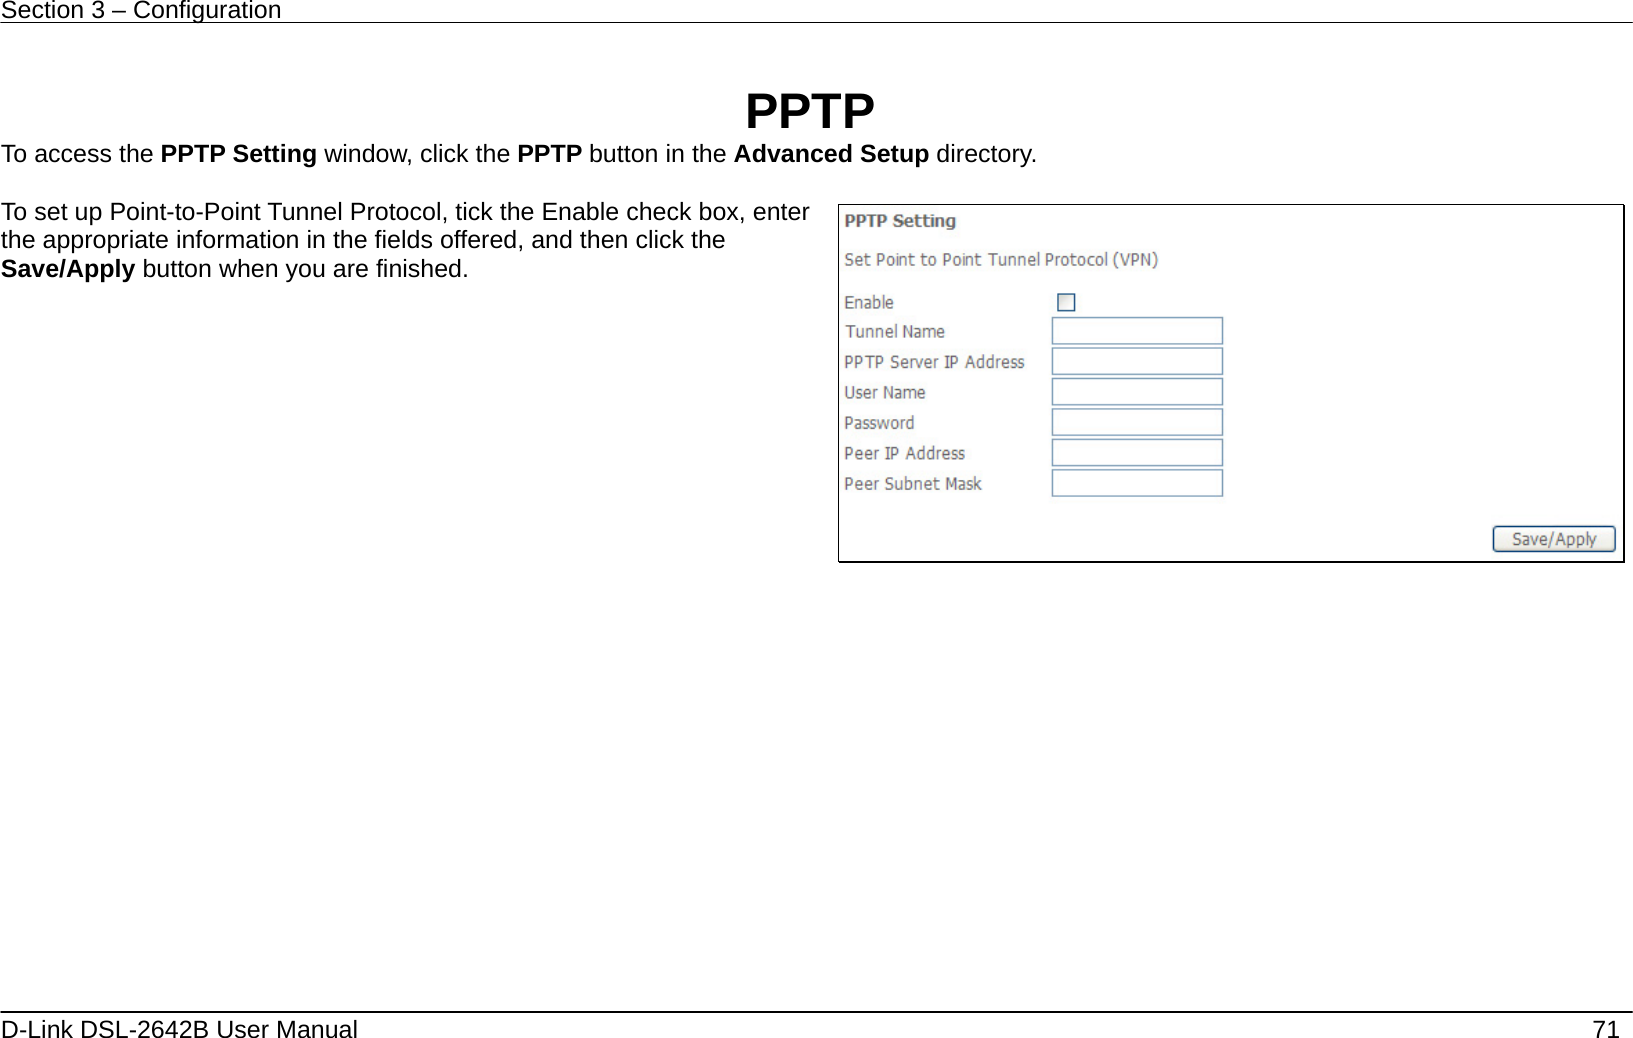 Section 3 – Configuration   D-Link DSL-2642B User Manual    71  PPTP To access the PPTP Setting window, click the PPTP button in the Advanced Setup directory.  To set up Point-to-Point Tunnel Protocol, tick the Enable check box, enter the appropriate information in the fields offered, and then click the Save/Apply button when you are finished.                 